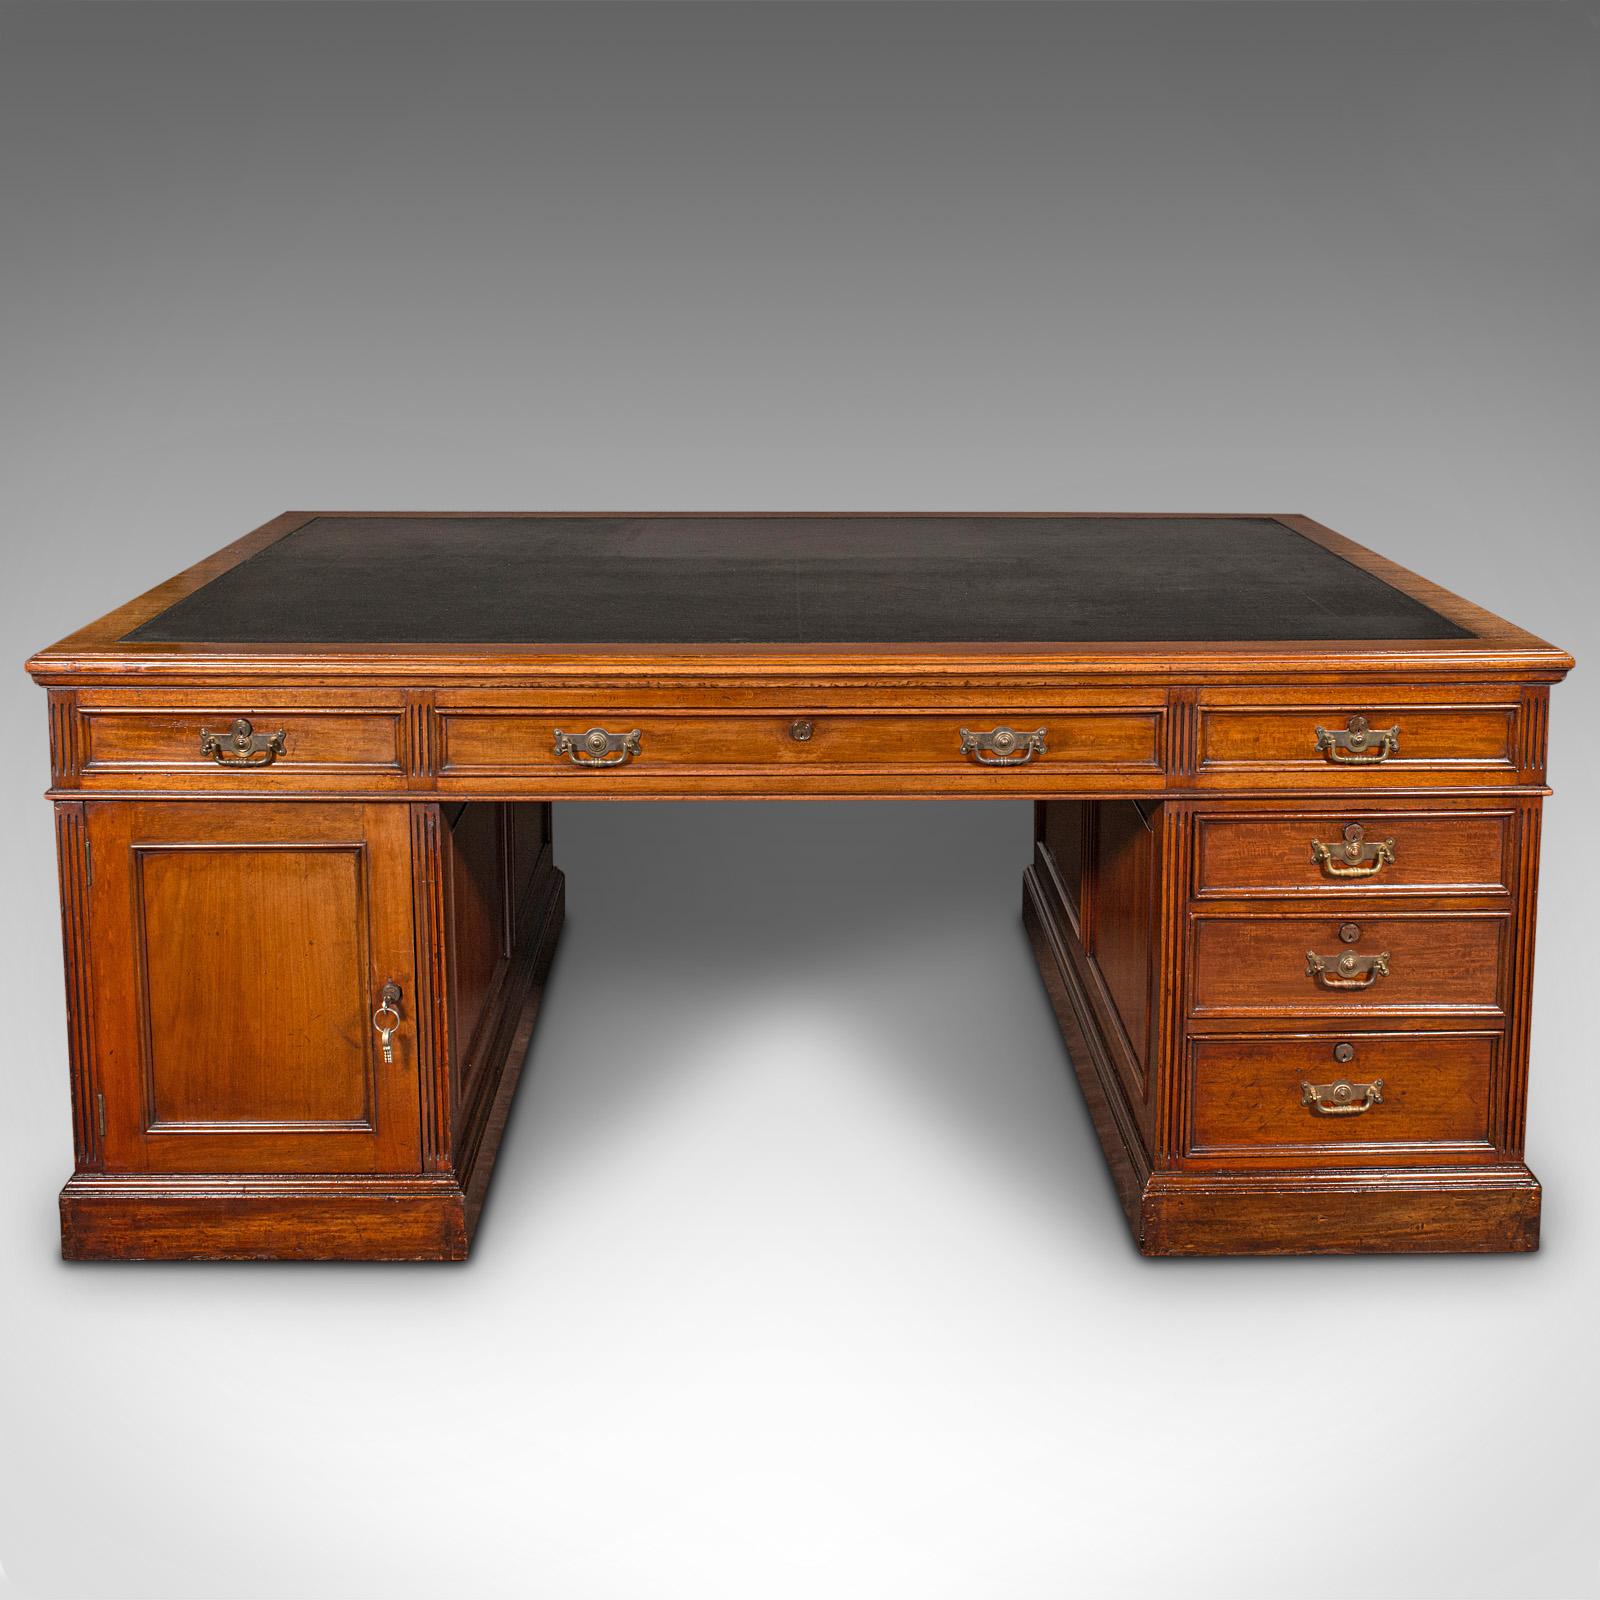 This is a very large antique partner's desk. An English, mahogany and leather twin pedestal desk by Maple & Co, dating to the Edwardian period, circa 1910.

Exceptional proportion and arrangement to this grand desk
Displays a desirable aged patina